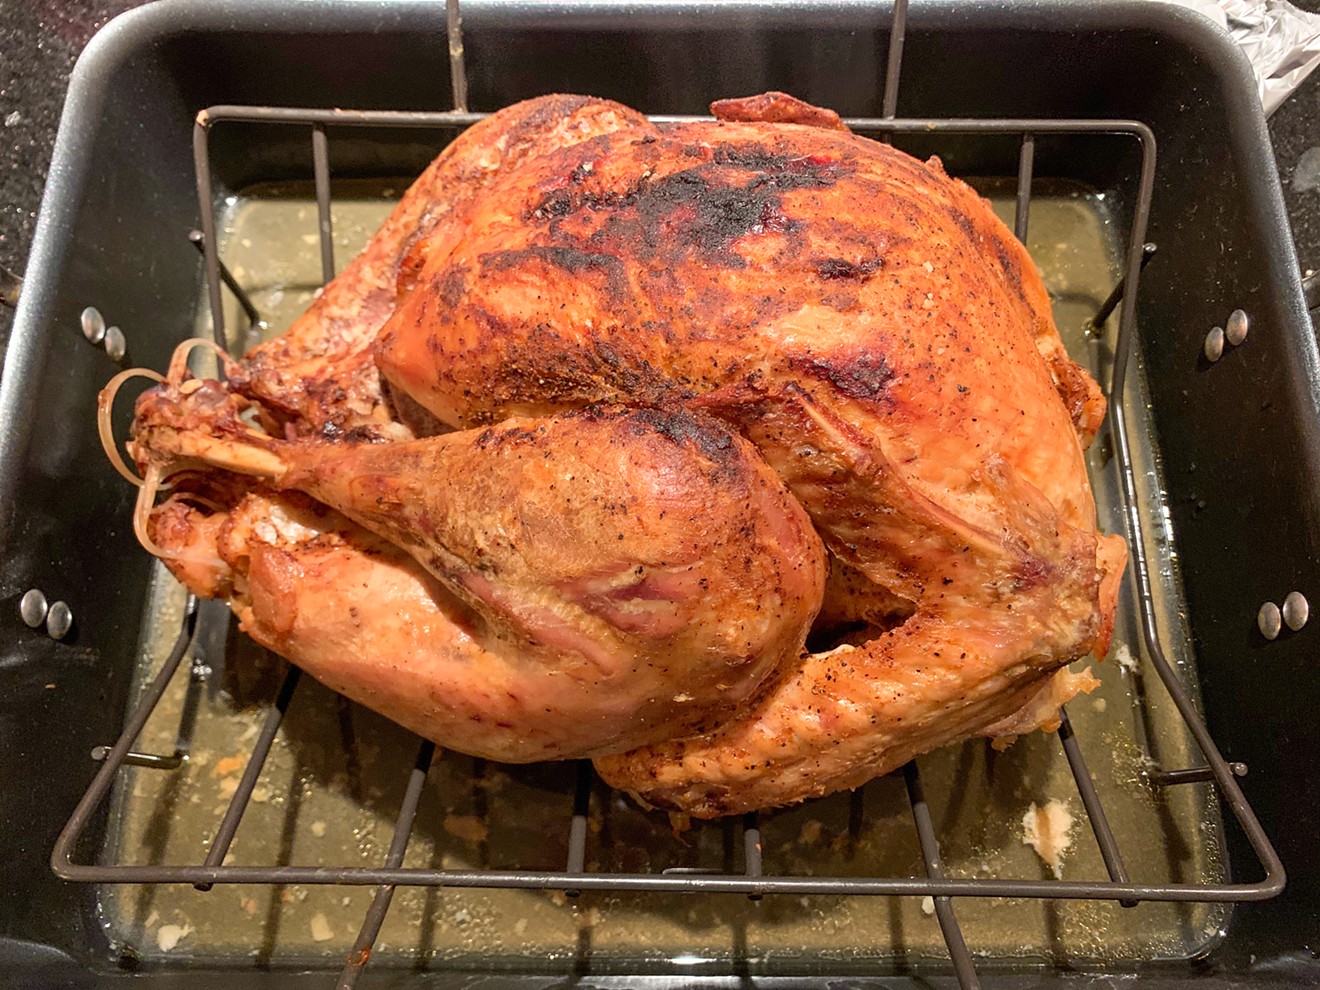 A whole turkey, brought to you by Popeyes.